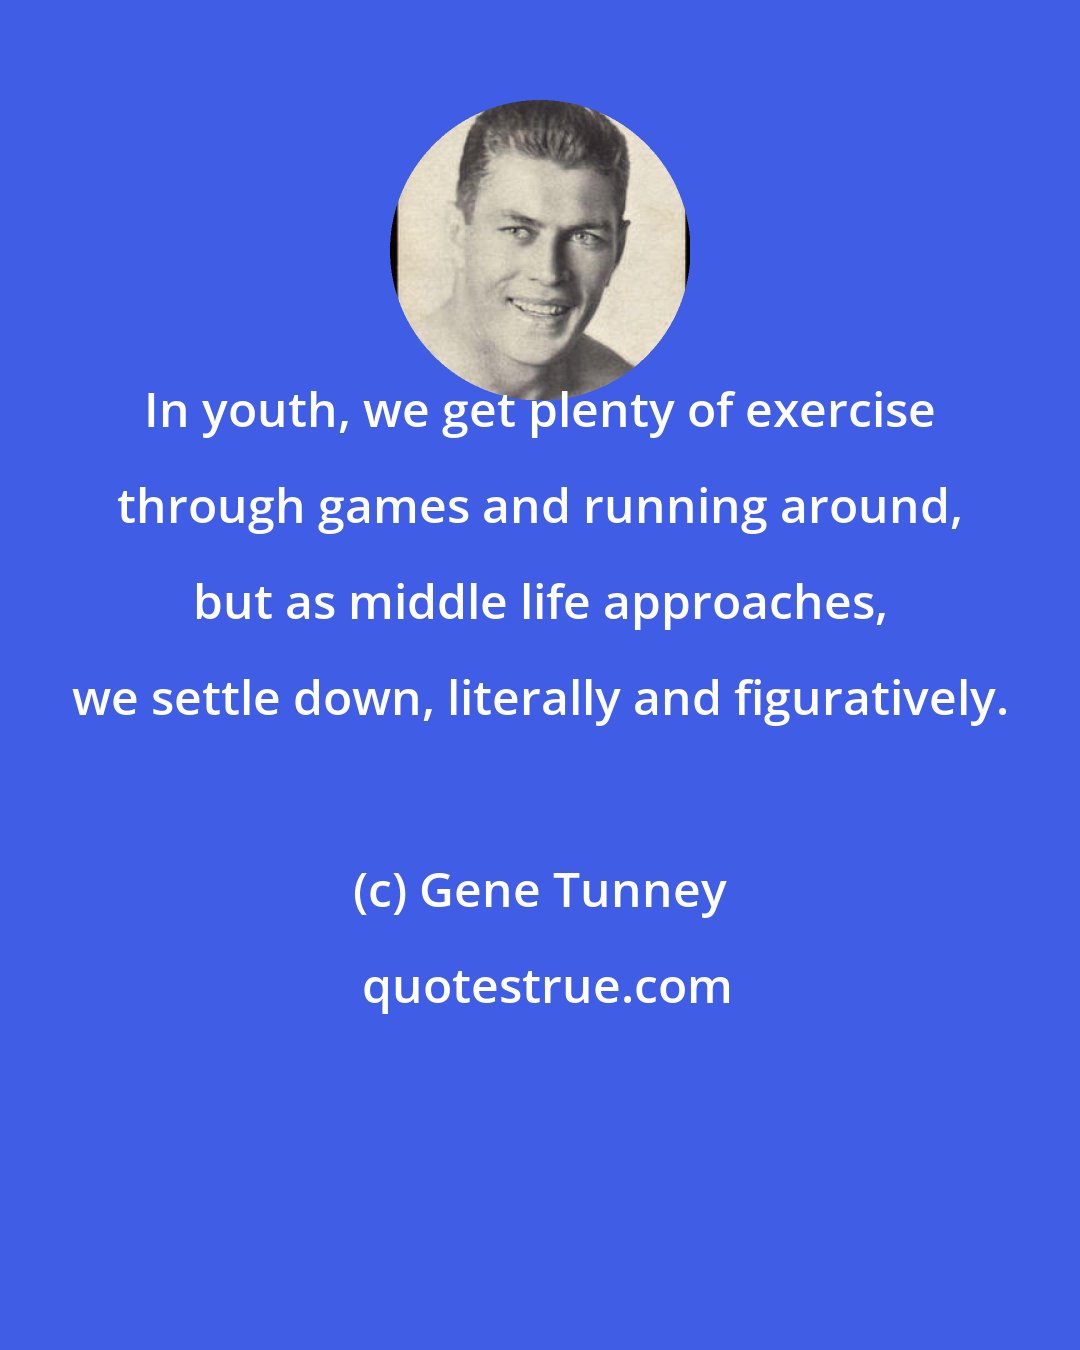 Gene Tunney: In youth, we get plenty of exercise through games and running around, but as middle life approaches, we settle down, literally and figuratively.